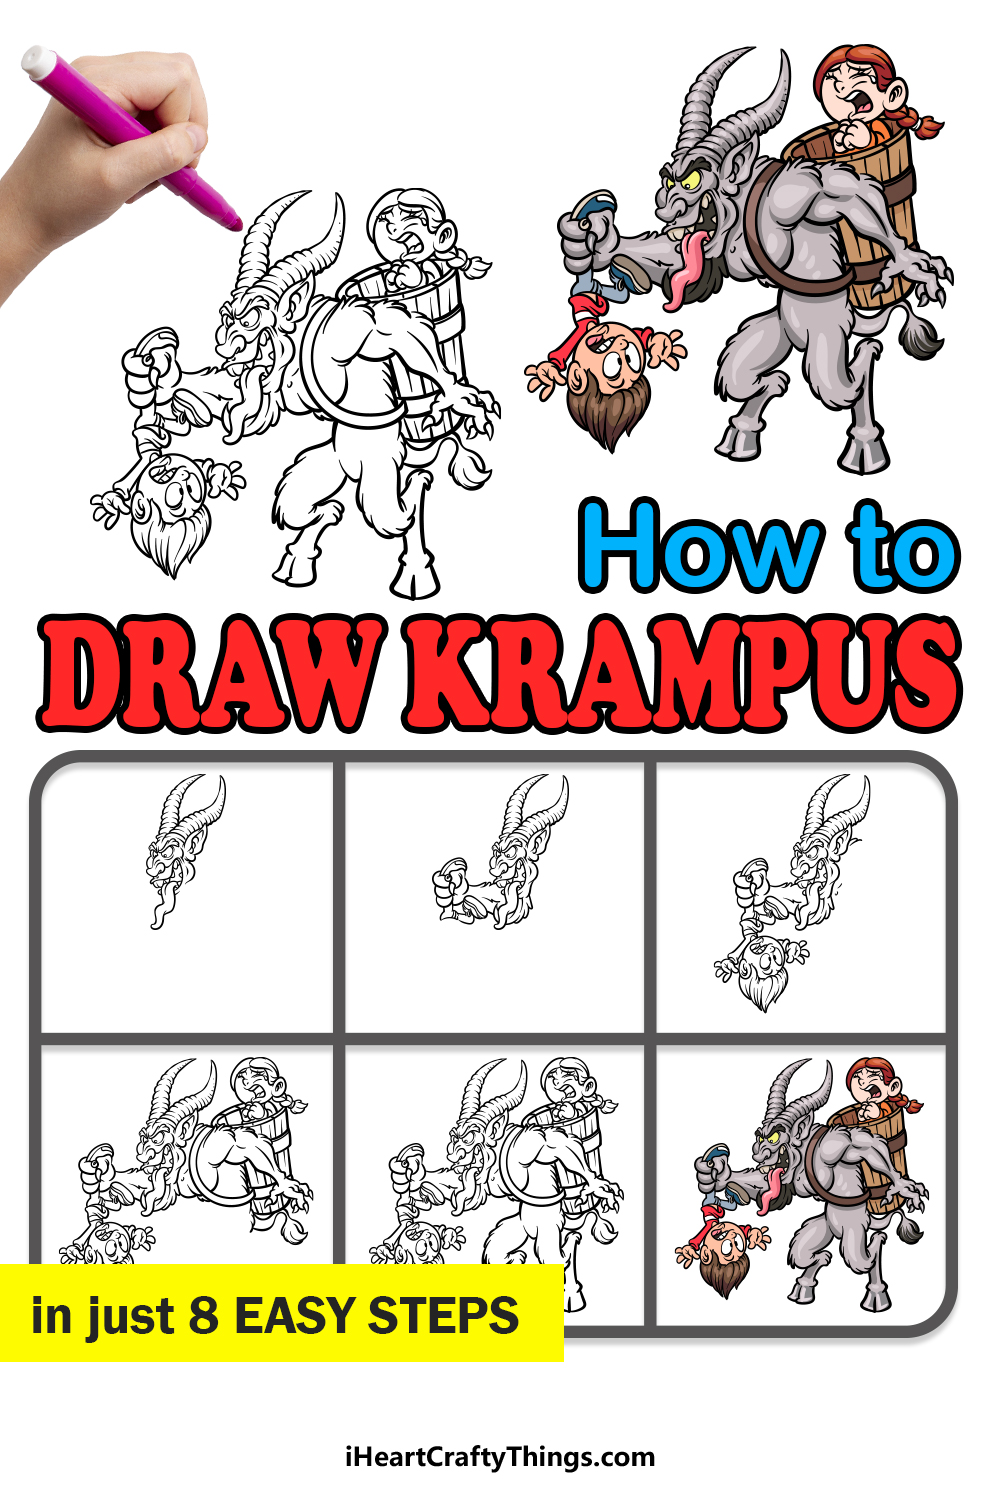 how to draw Krampus in 8 easy steps